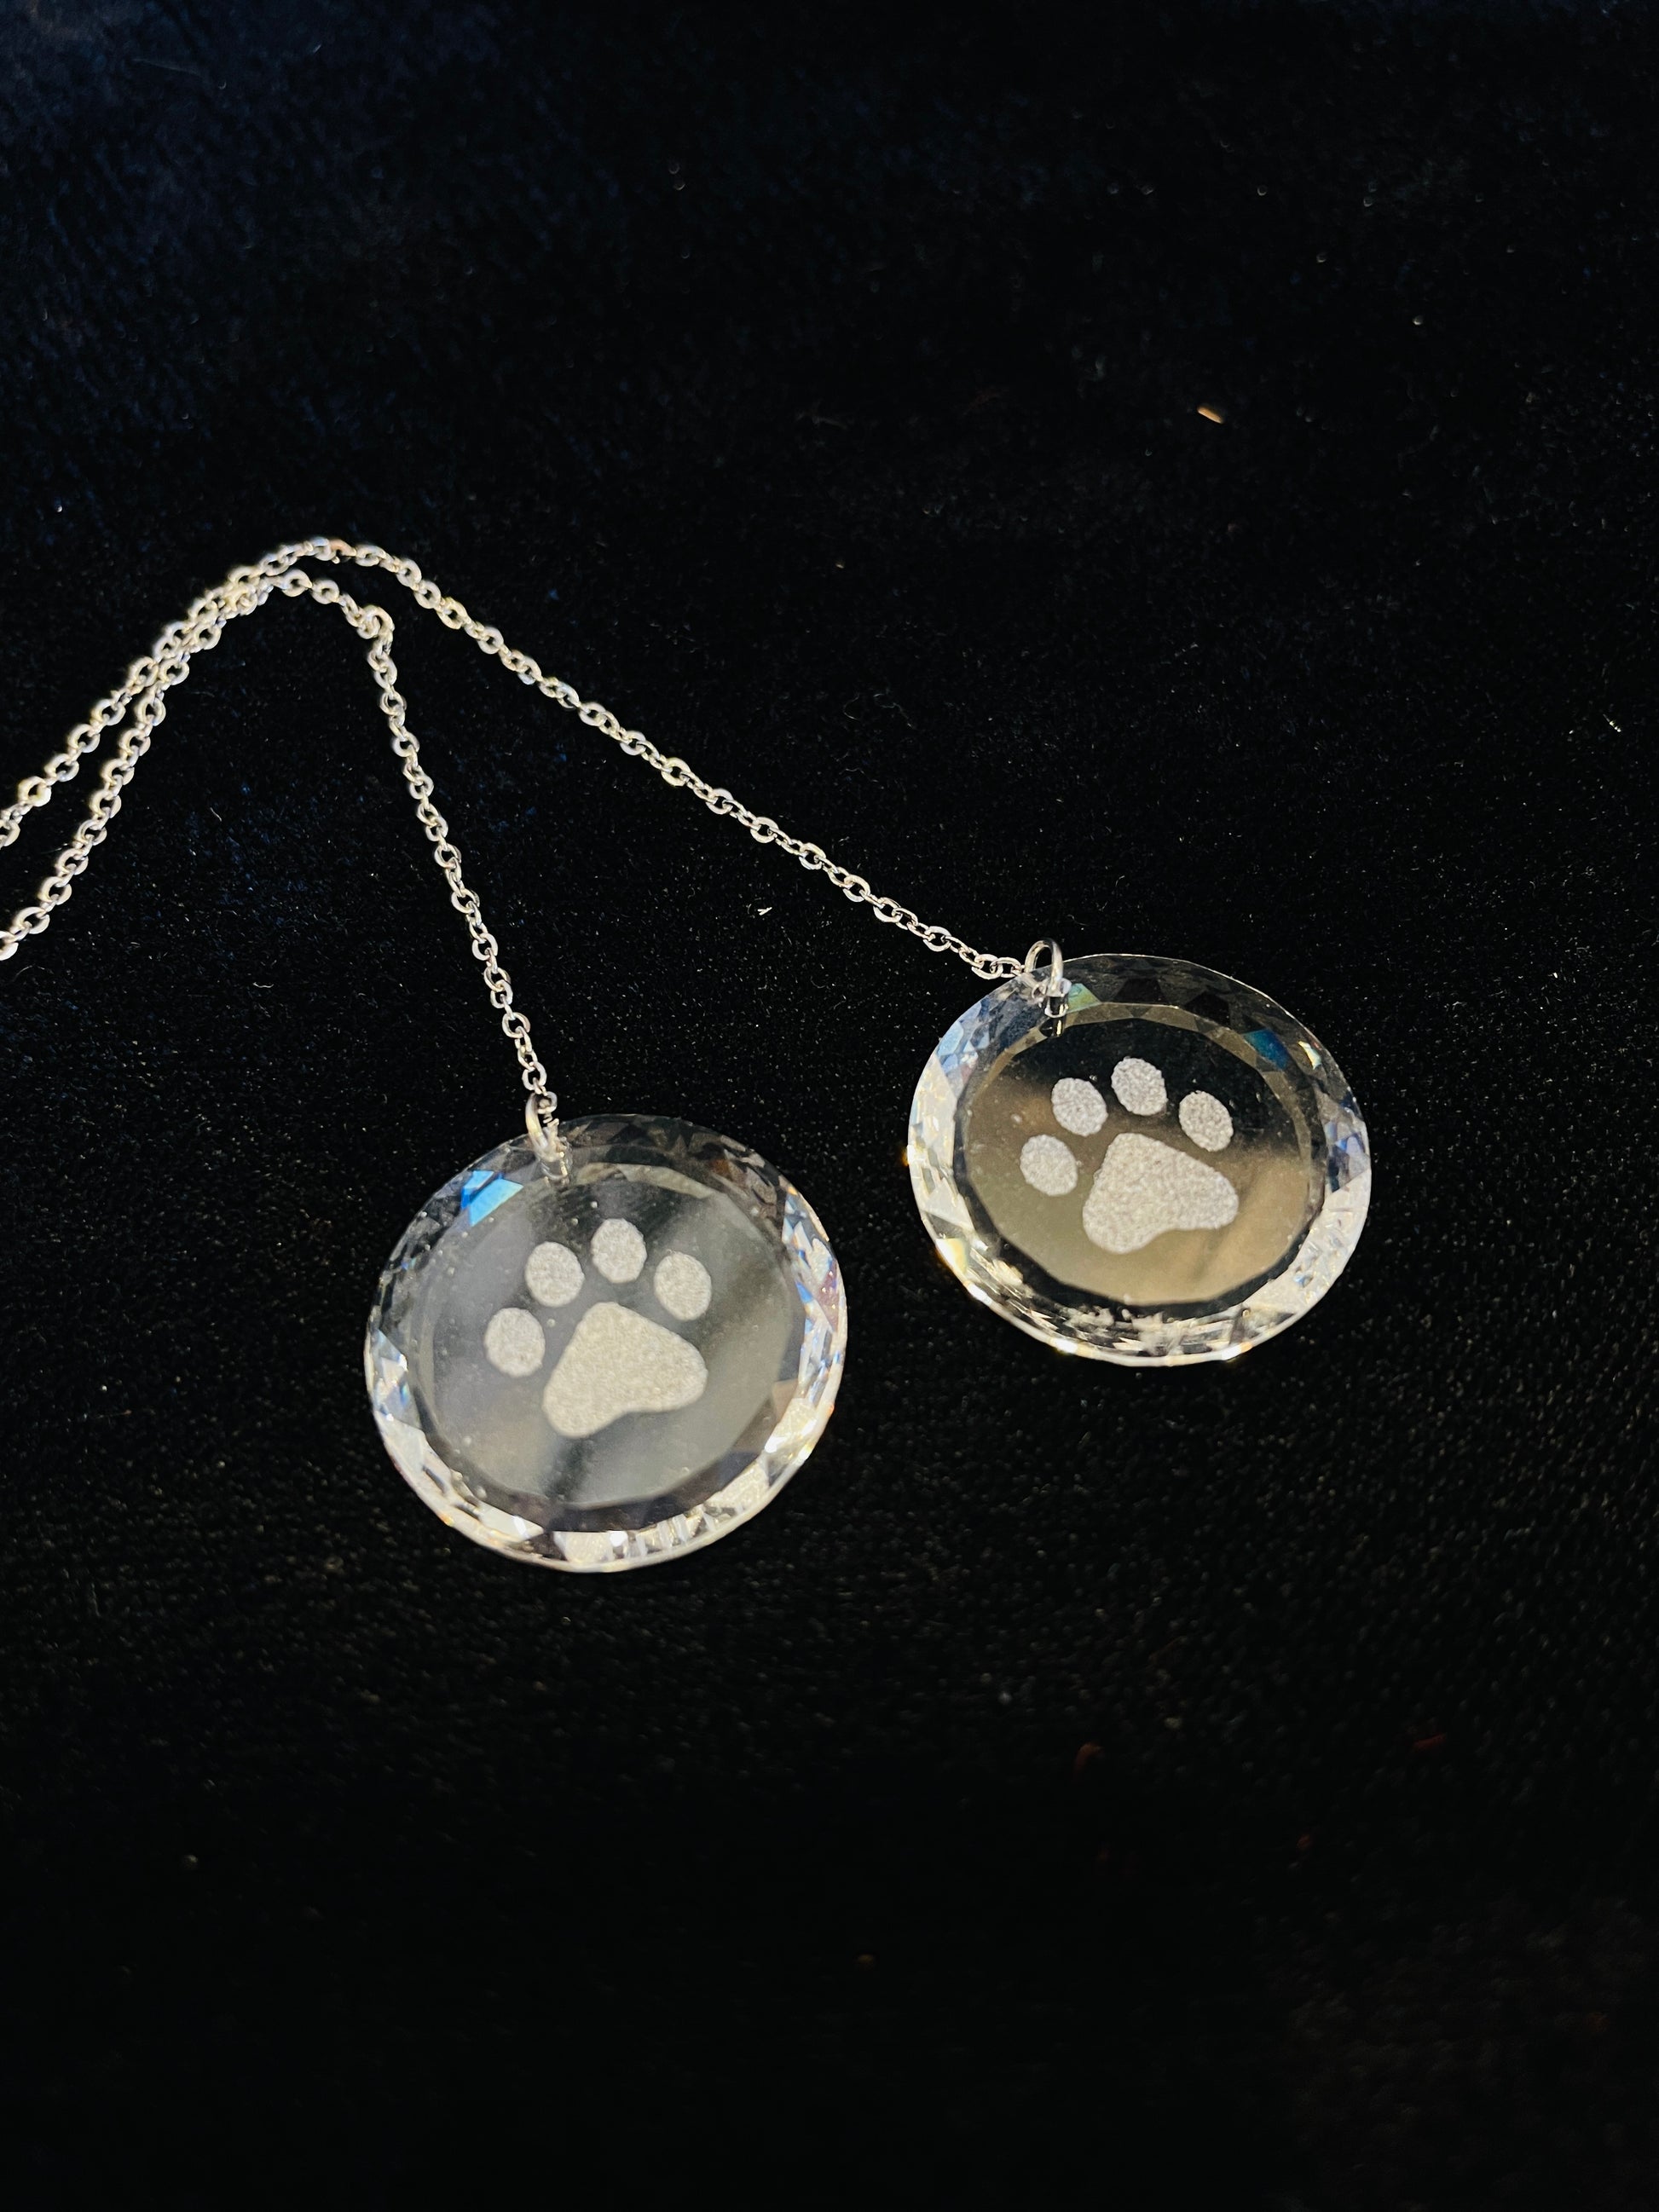 Swarovski Crystal Etched Earring on Sterling Silver Threads Paw Print